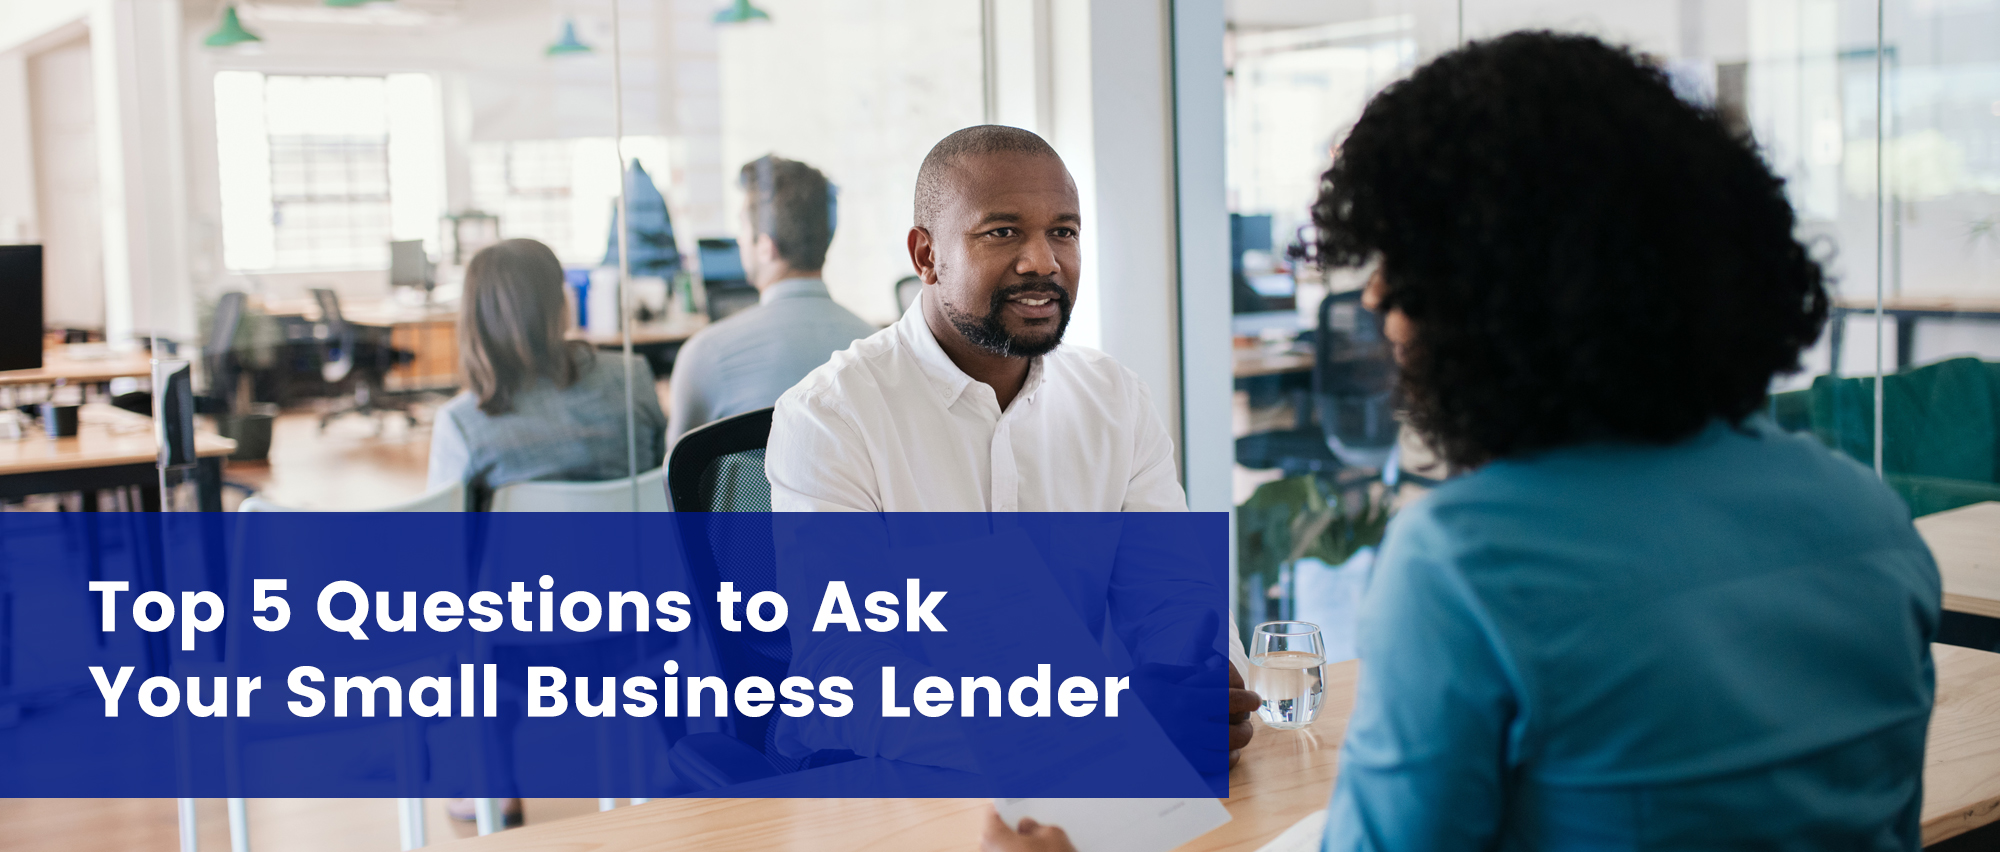 Top 5 Questions to Ask Your Small Business Lender